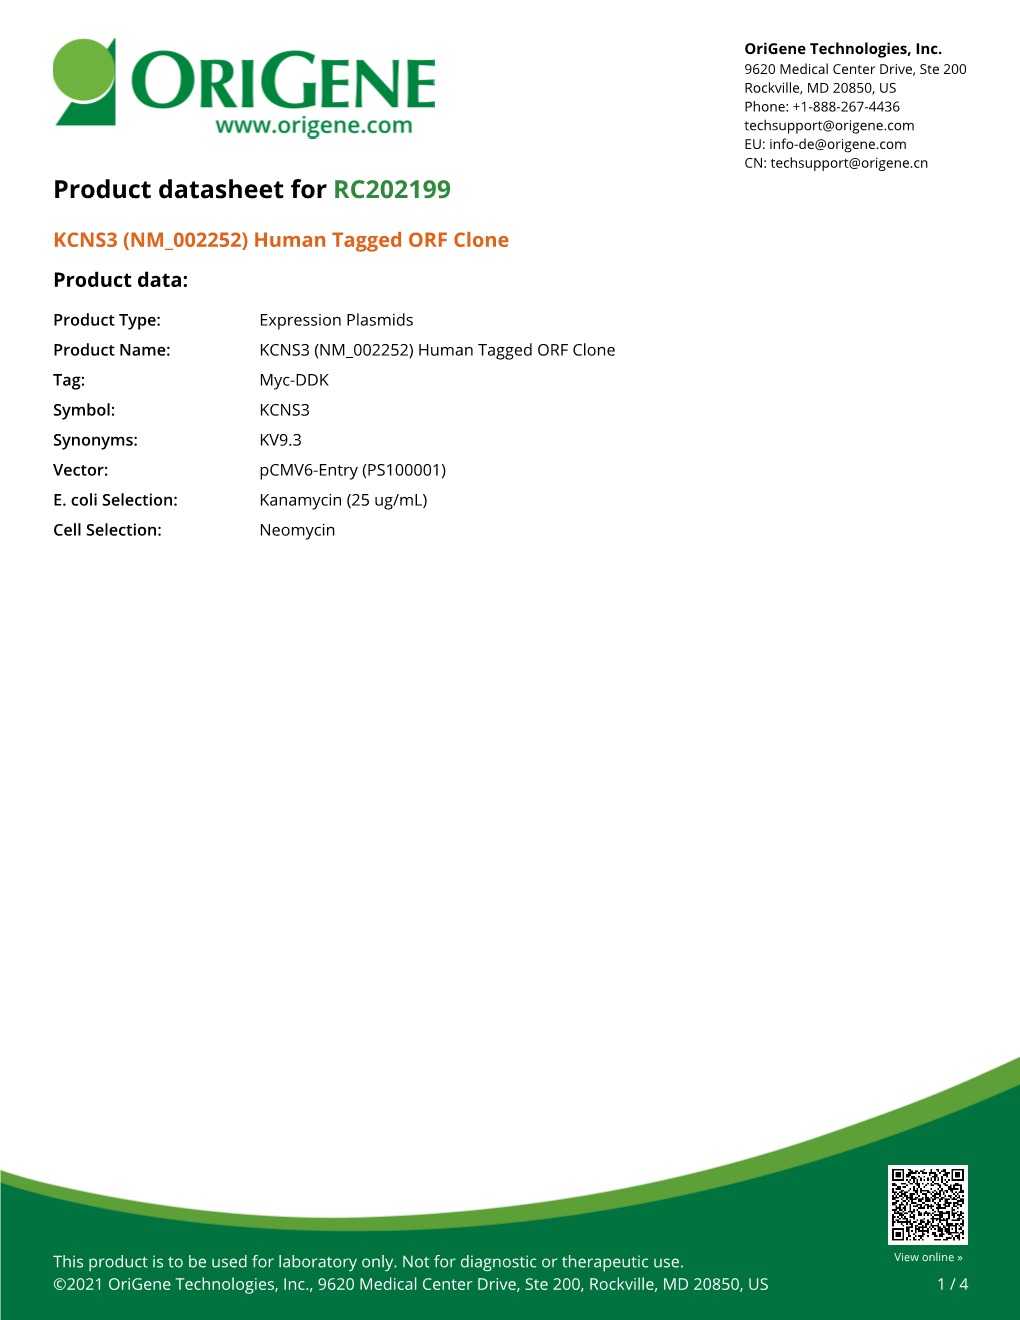 KCNS3 (NM 002252) Human Tagged ORF Clone Product Data